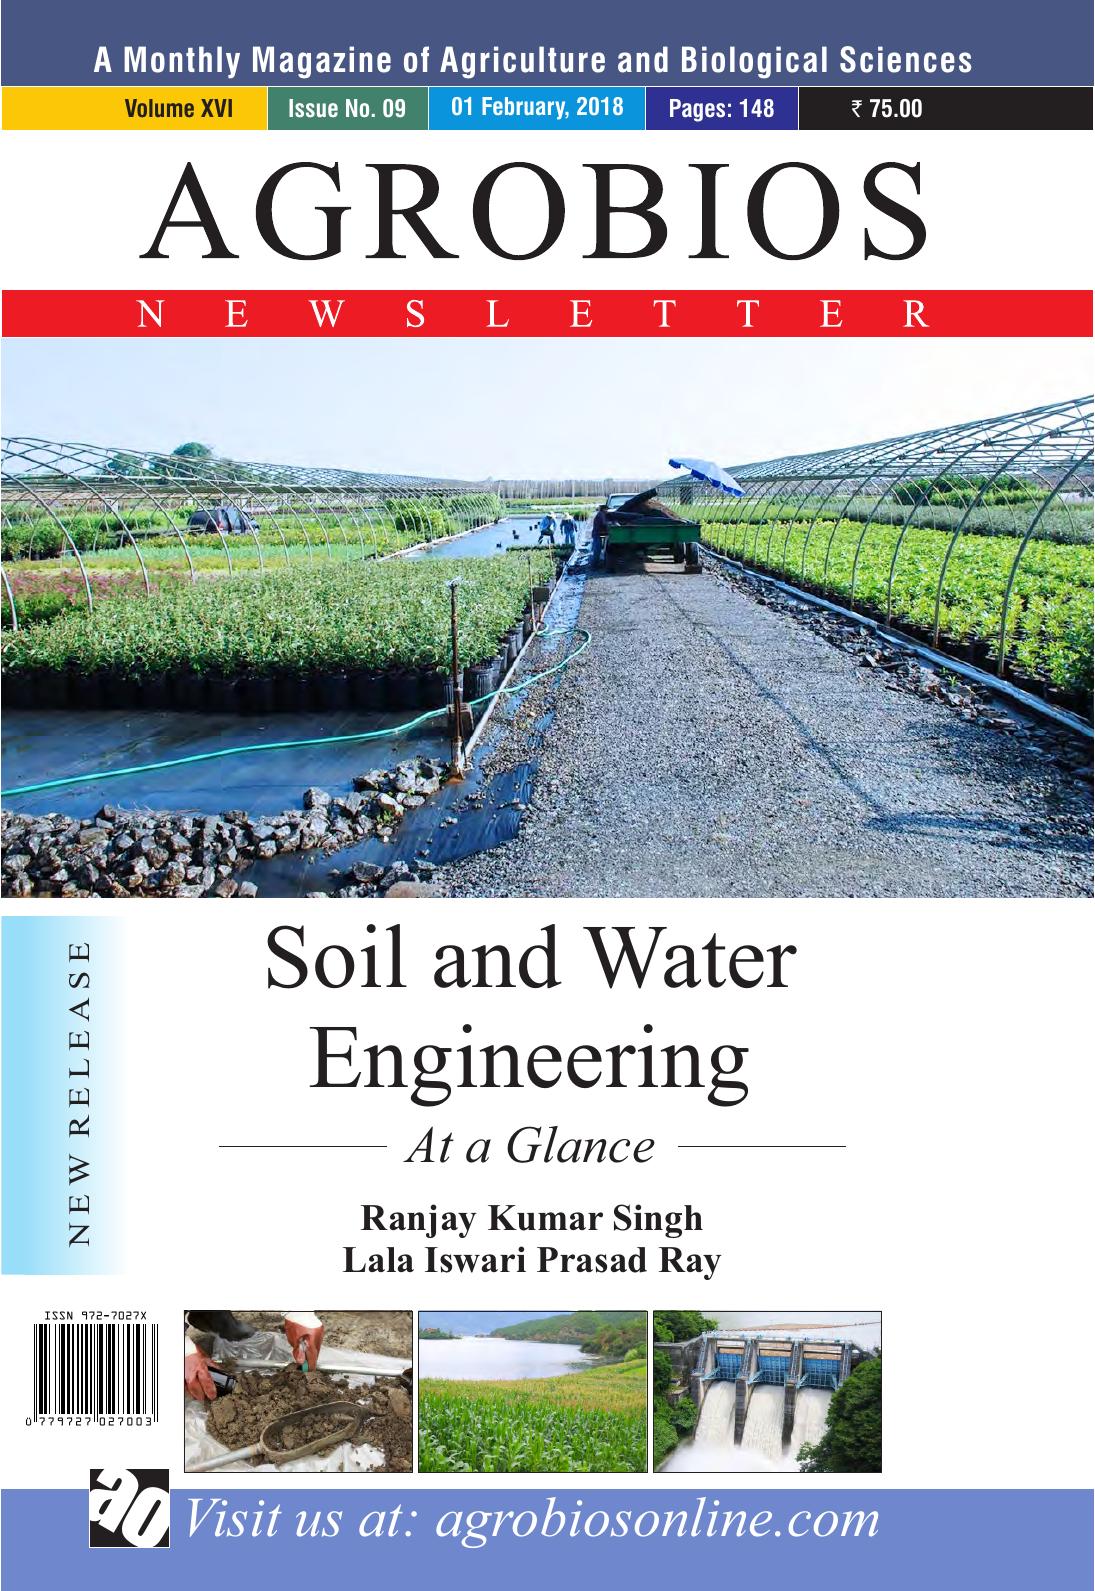 Soil and Water Engineering ( PDFDrive.com )